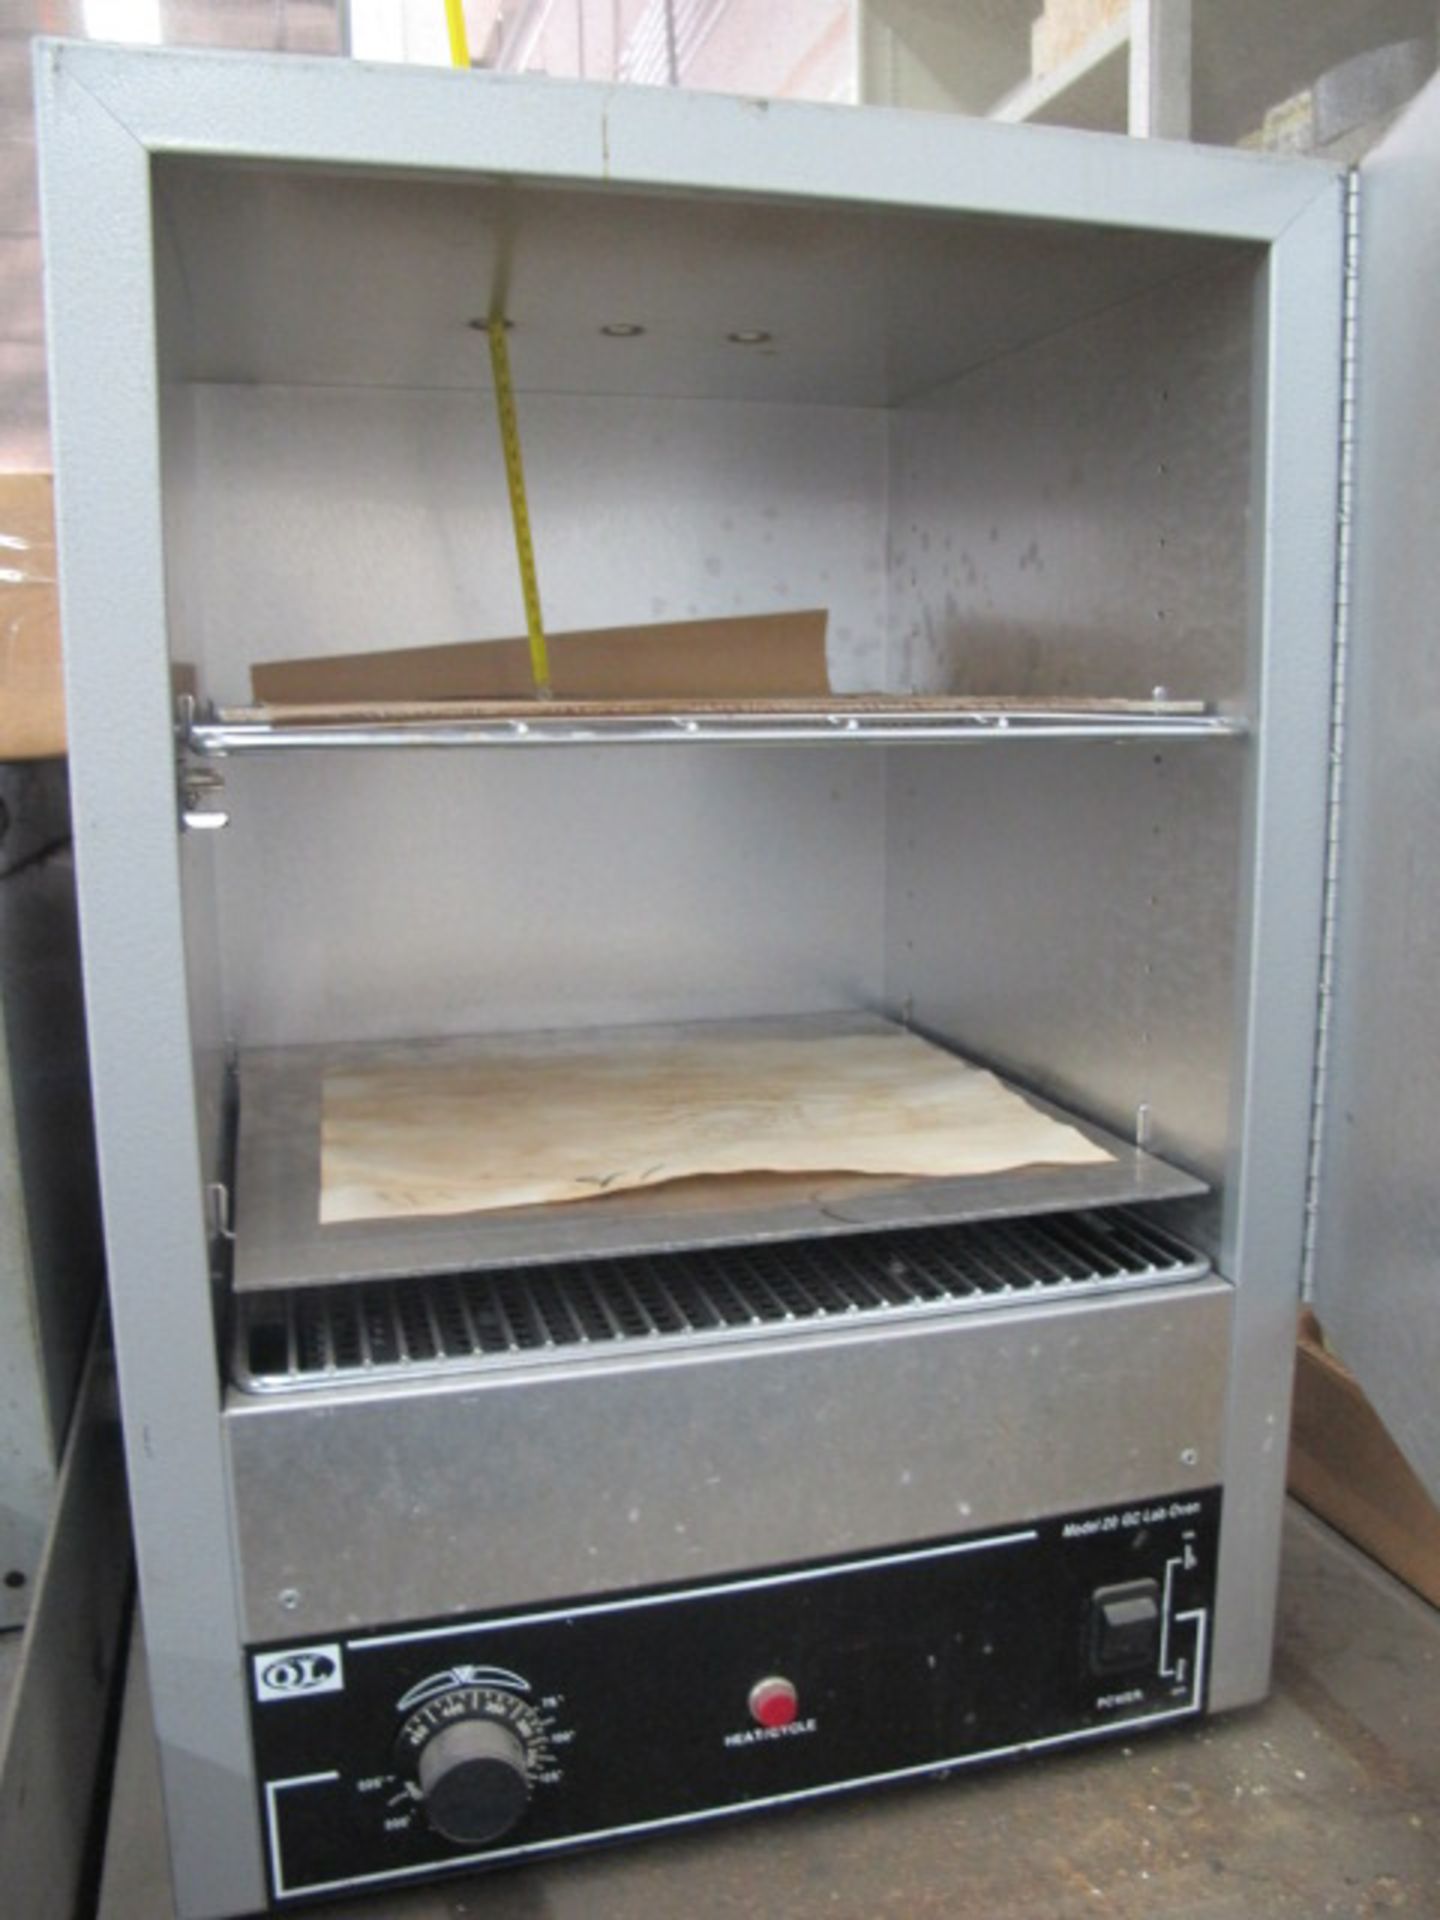 QL mdl. 20GC 450 Degree Electric Lab Oven - Image 4 of 4